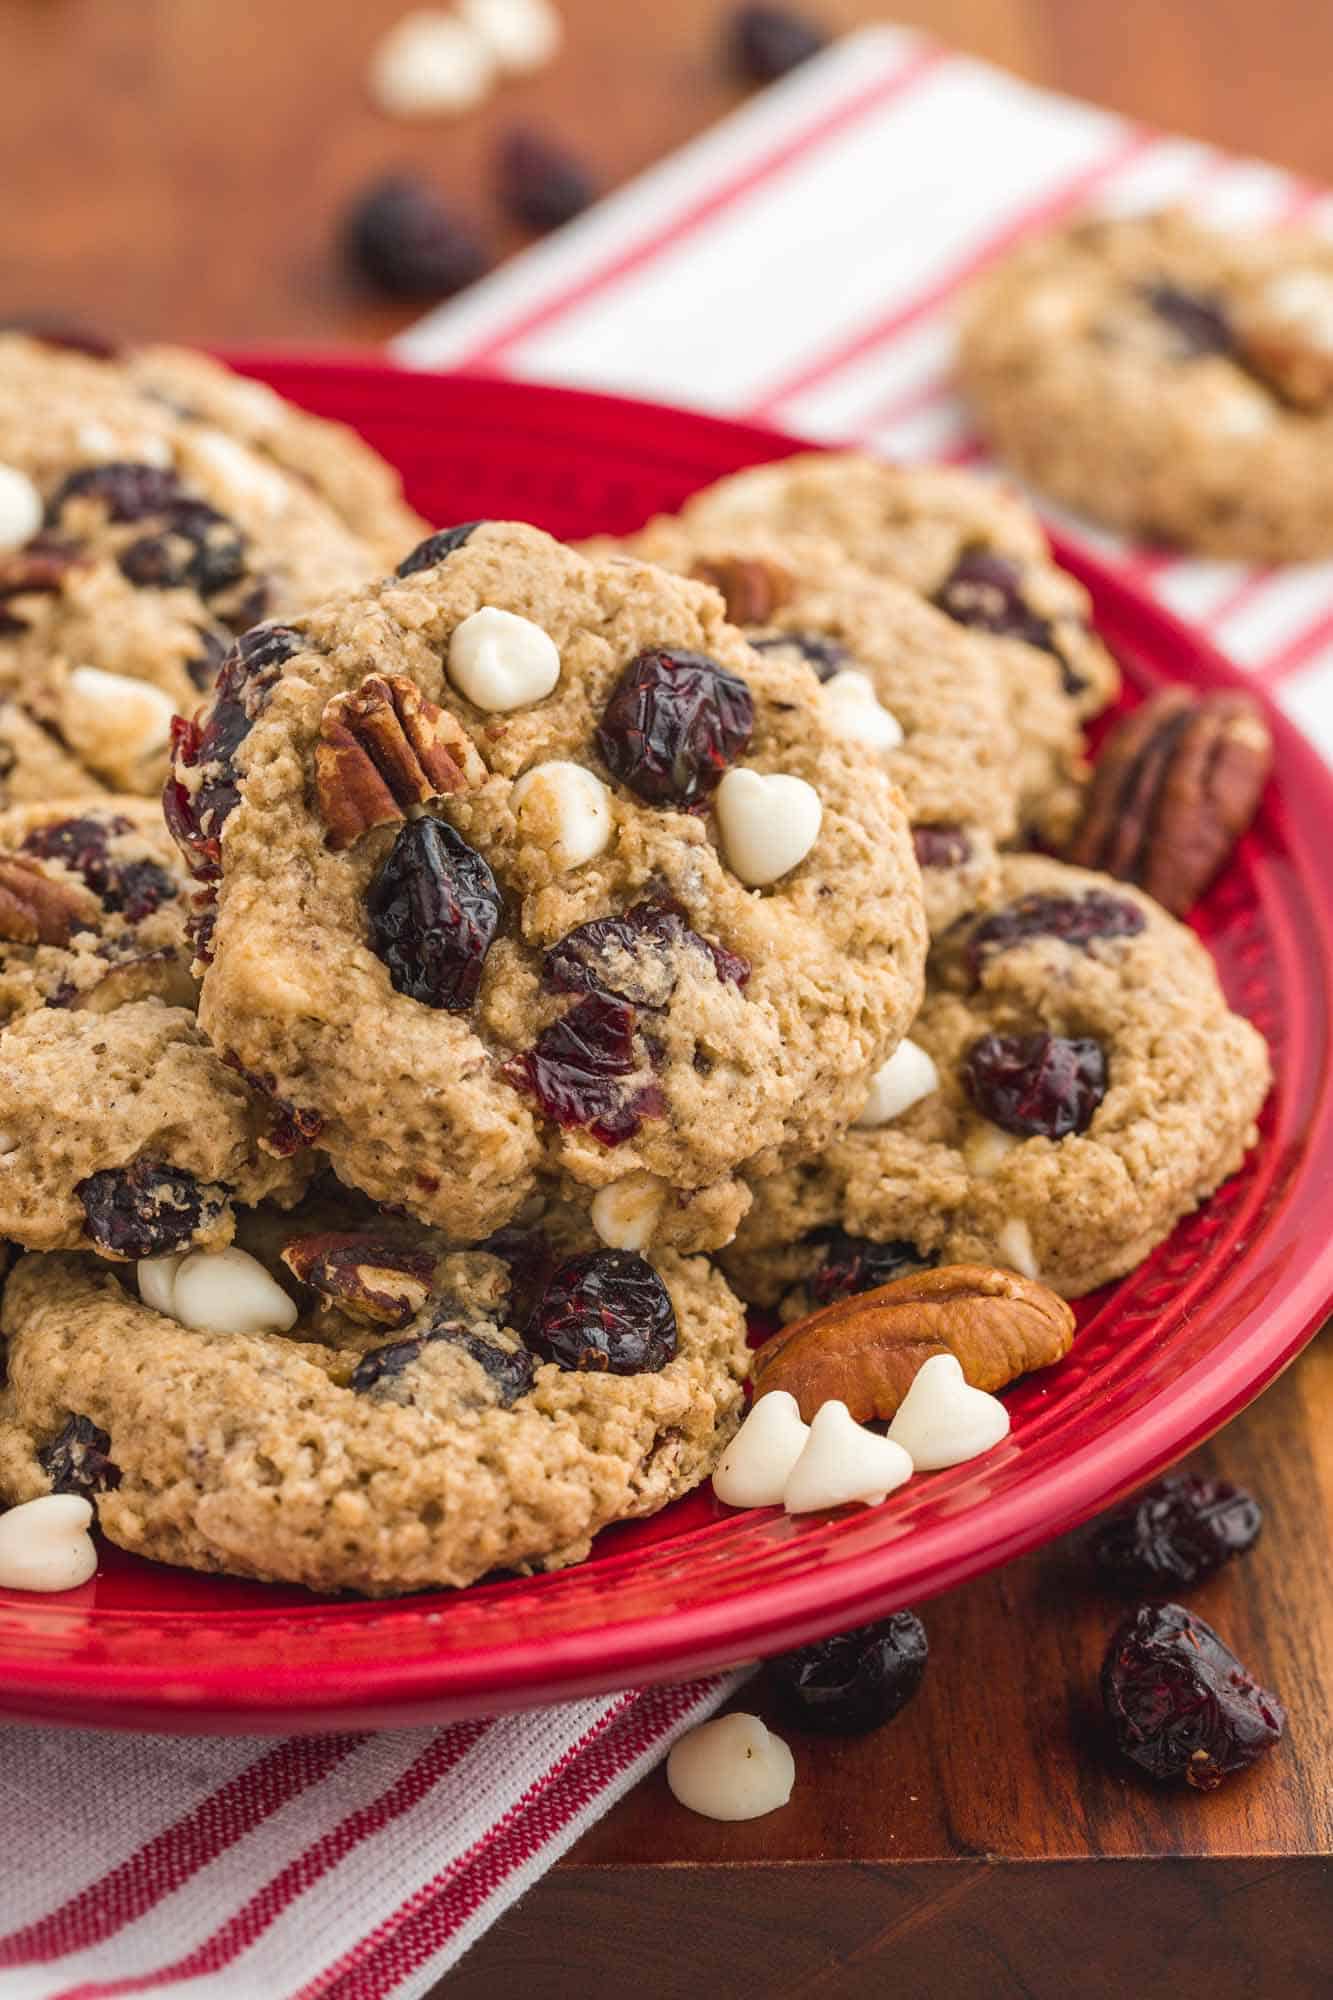 Cranberry oatmeal cookies on a red plate